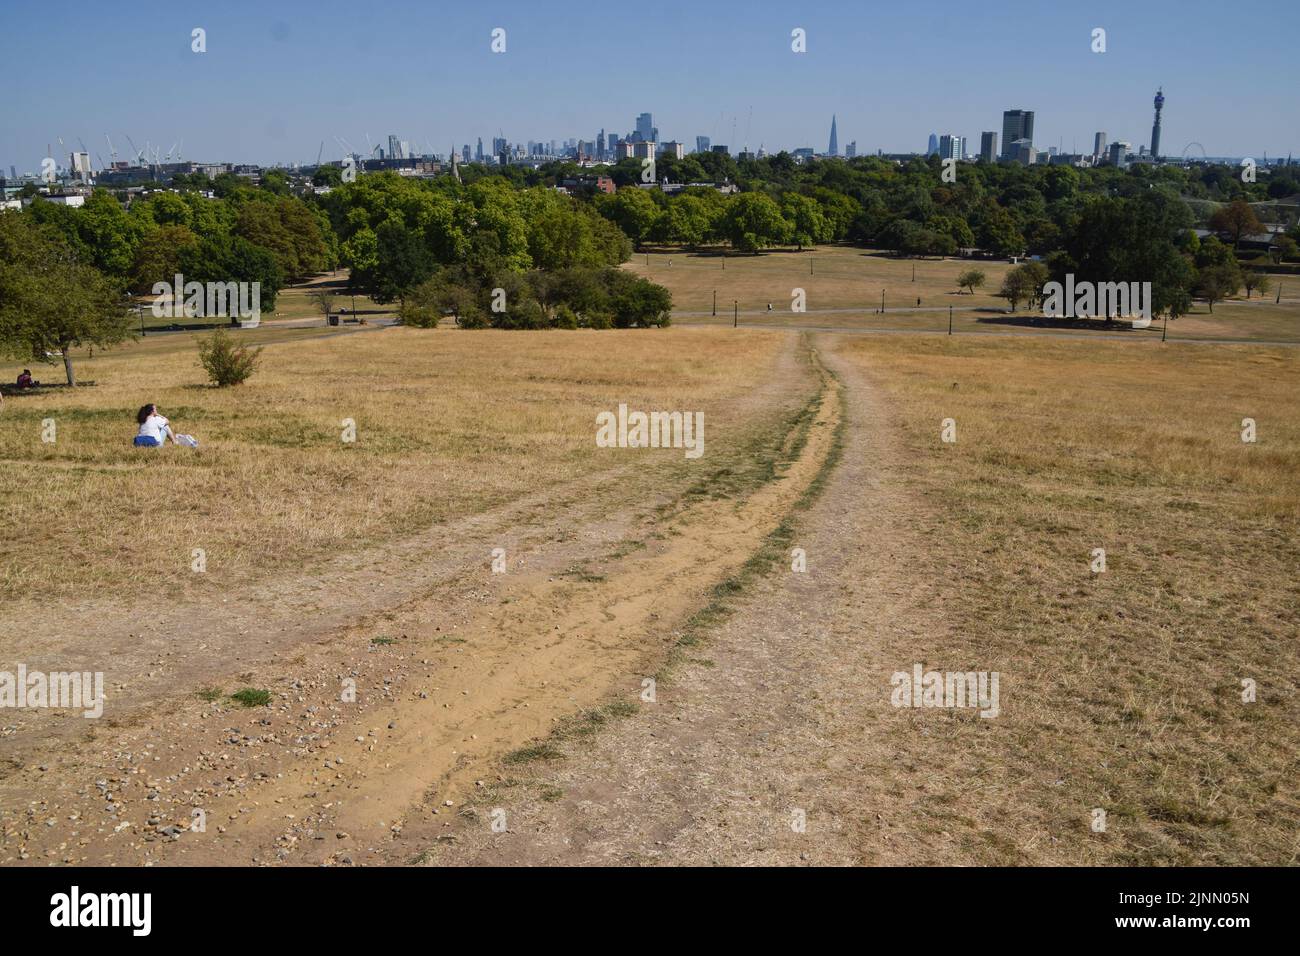 Dry grass covers a parched Primrose Hill as a drought is declared in parts of England. Persistent heatwaves resulting from human-induced climate change have affected much of London, with wildfires and droughts seen across the capital. Stock Photo